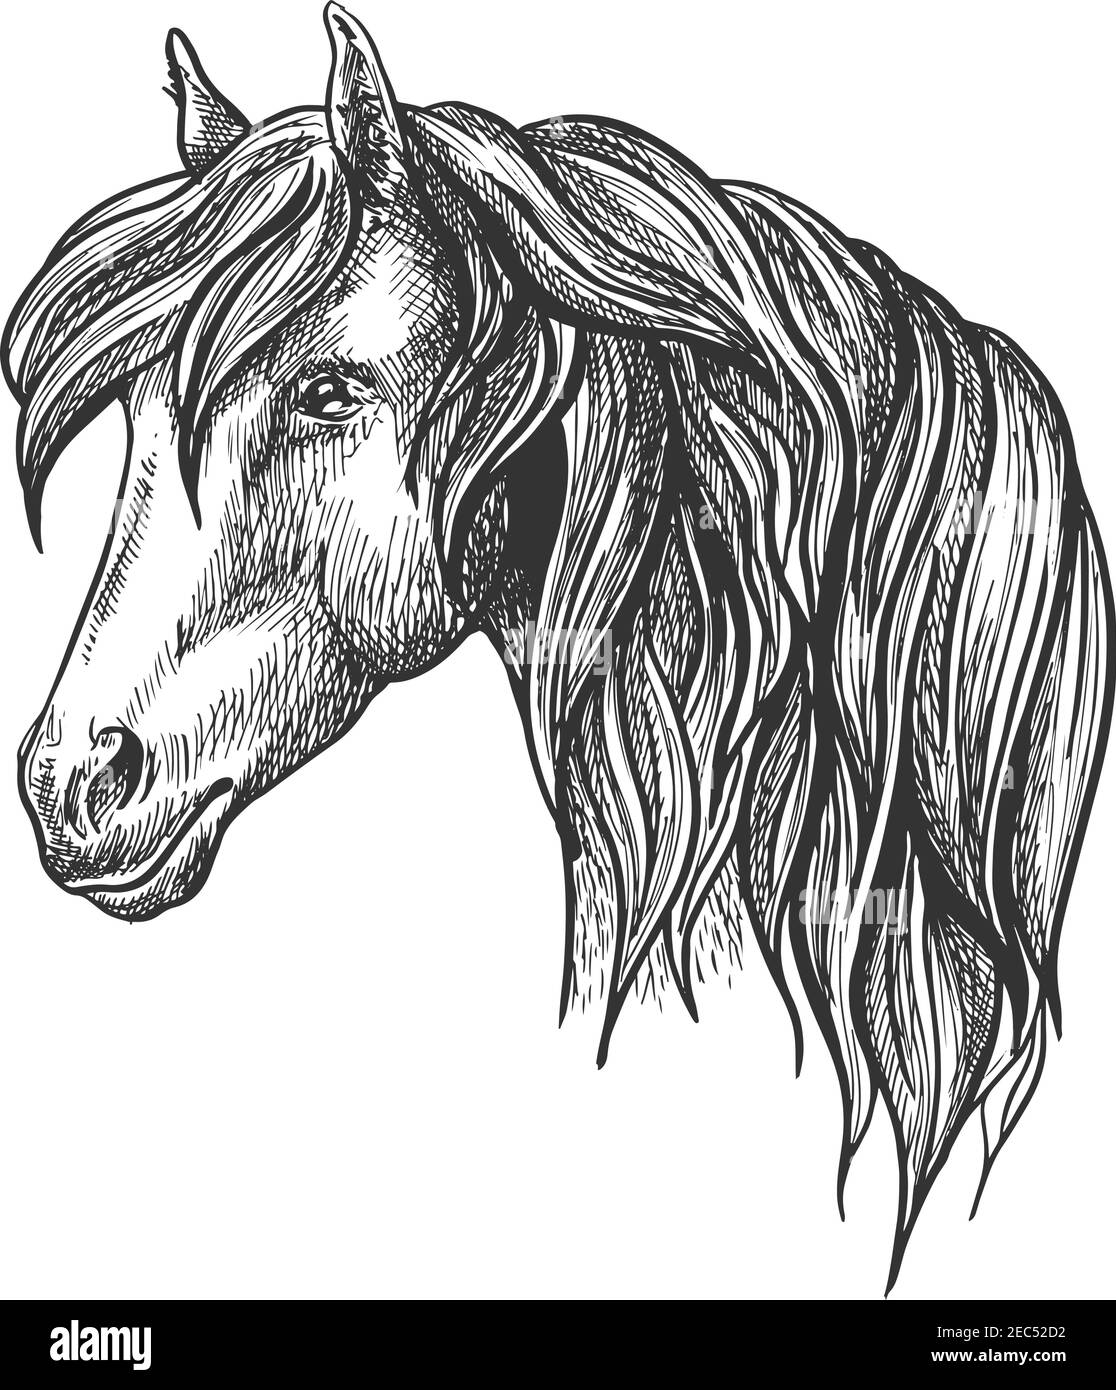 Calm looking horse head sketch with charming curly mane, happy glance. For mascot design or wildlife symbol, fauna or equestrian sport themes. Stock Vector